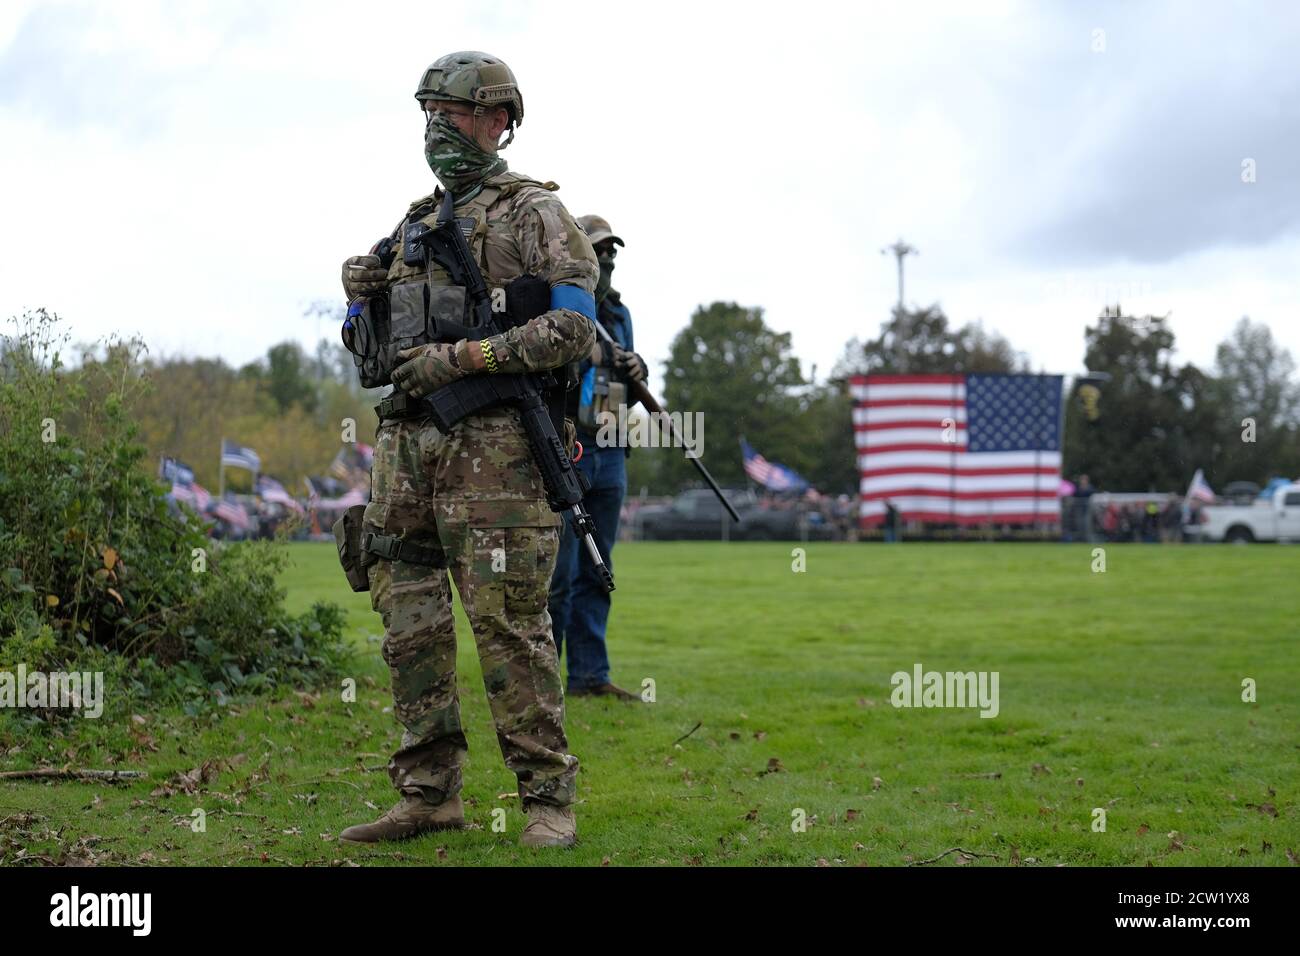 Portland, USA. 26th Sep, 2020. Men holding firearms secure the perimeter around a Proud Boys rally in Portland, Ore., at Delta Park on September 26, 2020, in support of Kenosha shooter Kyle Rittenhouse and Aaron 'Jay' Danielson who was shot dead by an antifascist protester during the ongoing Black Lives Matter protests in the city. (Photo by Alex Milan Tracy/Sipa USA) Credit: Sipa USA/Alamy Live News Stock Photo